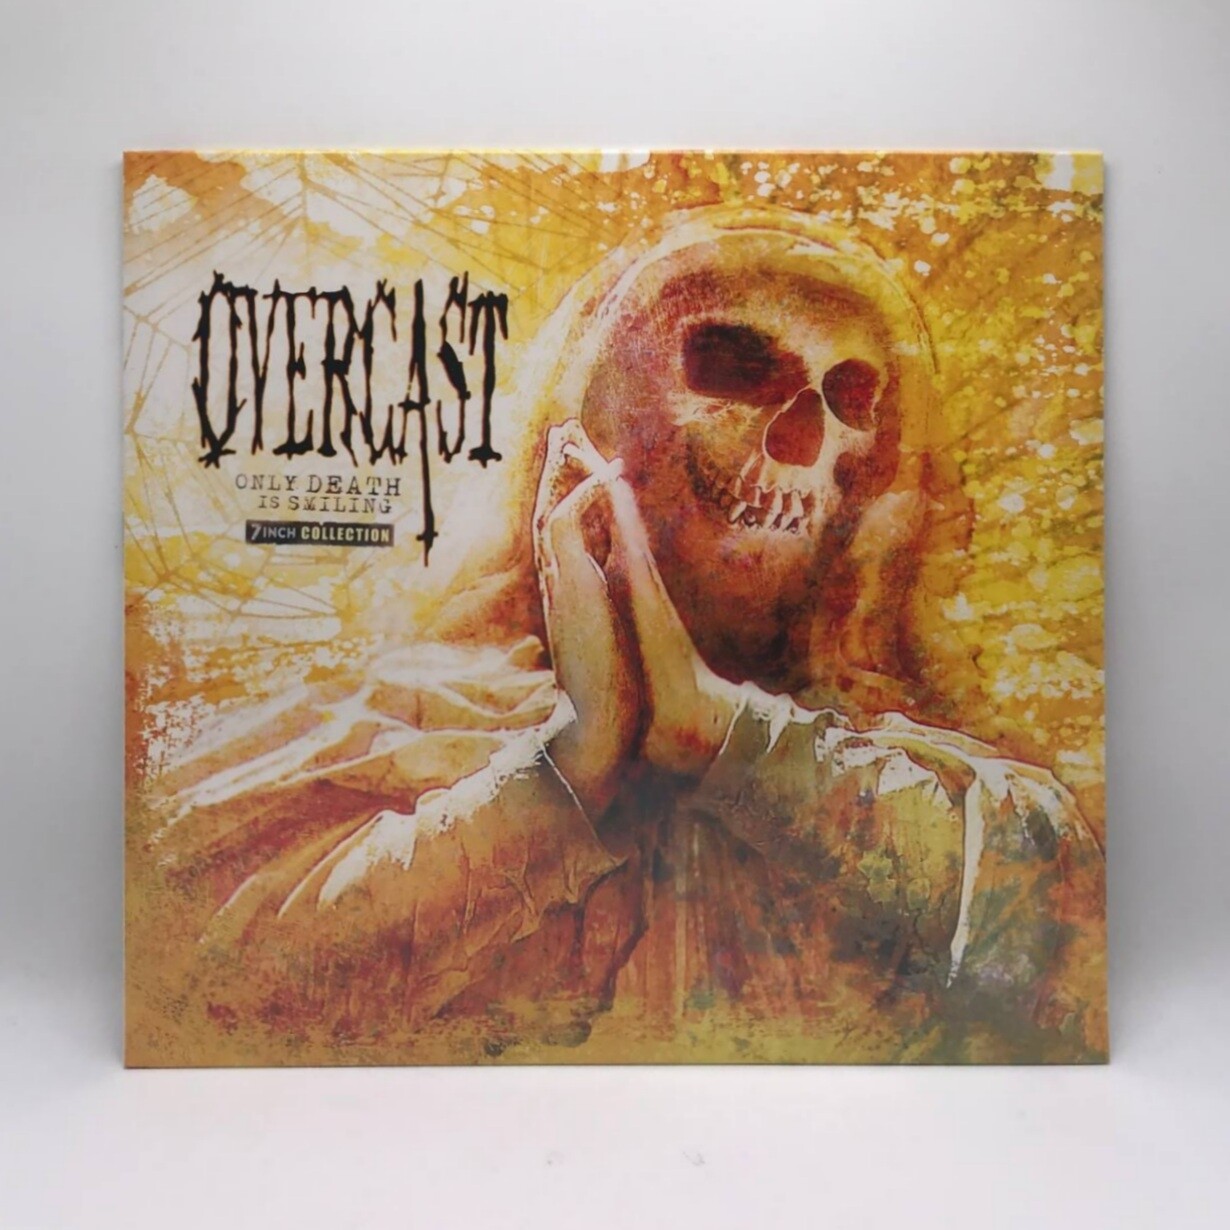 OVERCAST -ONLY DEATH IS SMILING: 7 INCH COLLECTION- LP (YELLOW WITH BLACK SPLATTER VINYL)